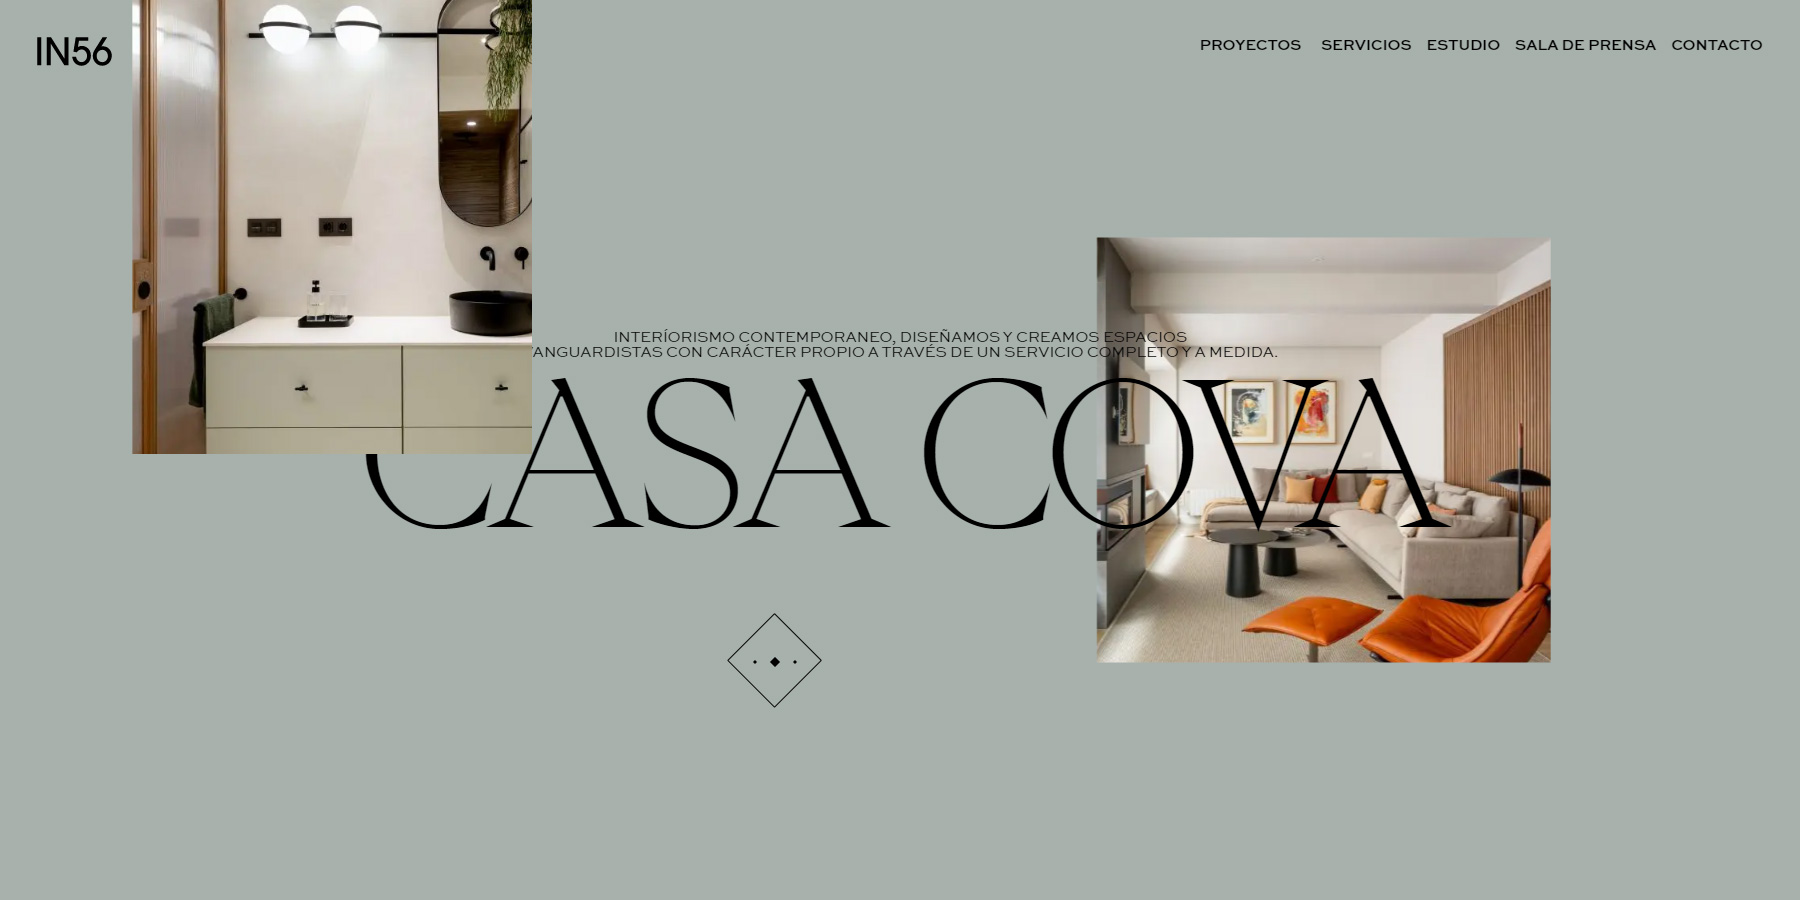 IN56 - Website of the Day